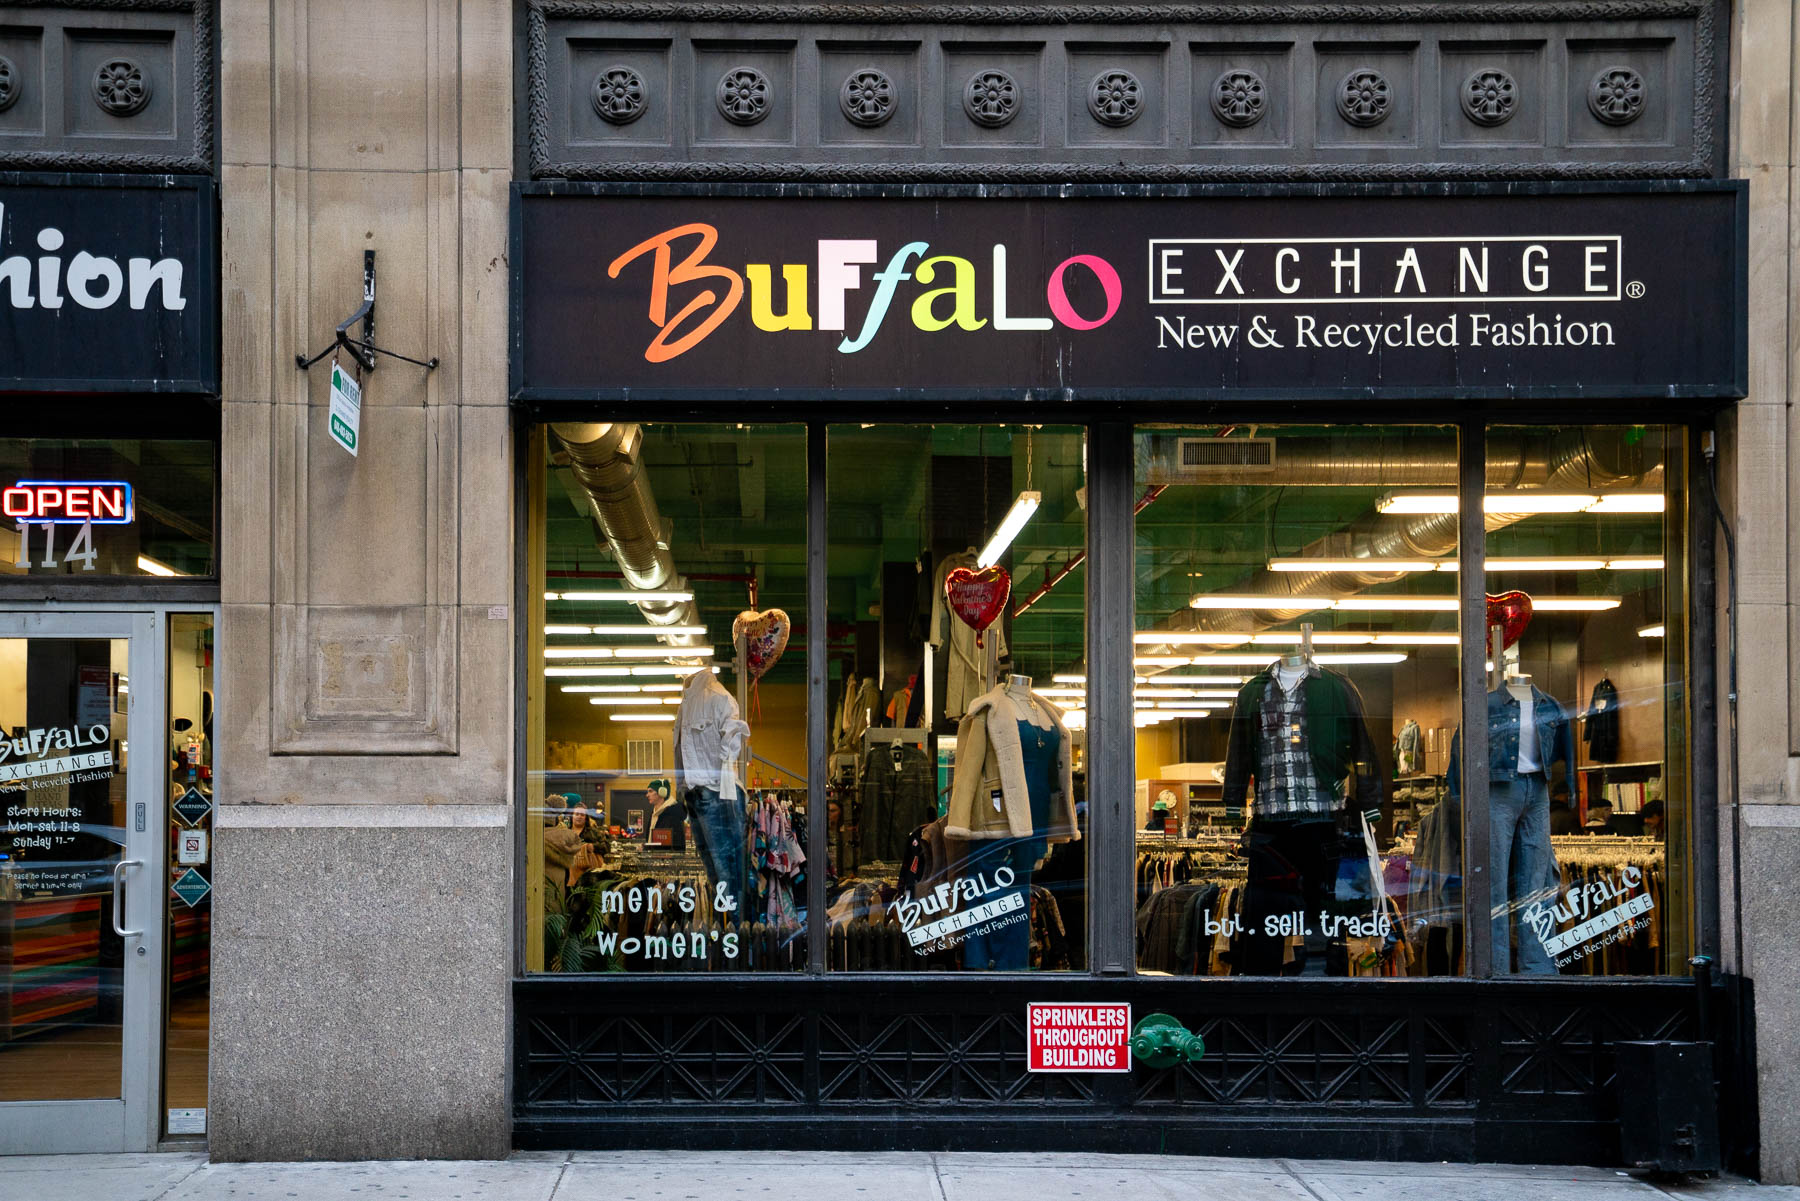 Exterior of Buffalo Exchange, one of the best thrift stores in NYC with display mannequins in its windows